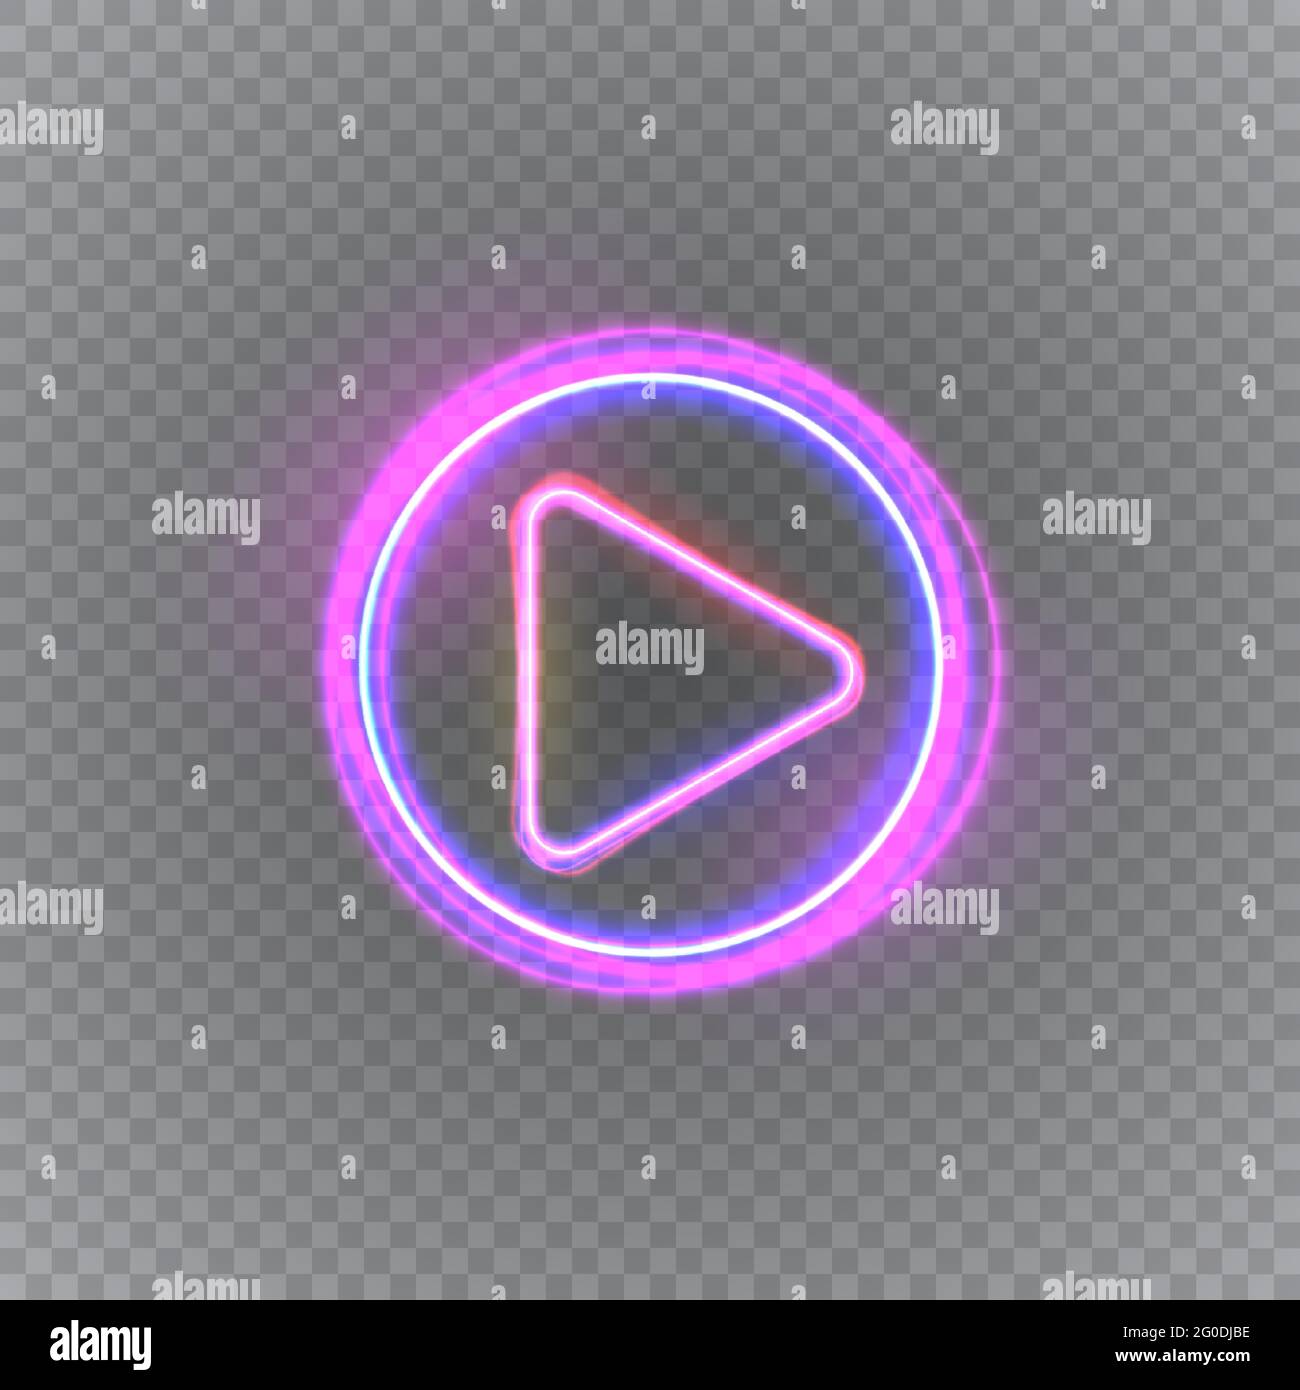 Gloving neon music play button isolated on transparent background. Vector illustration Stock Vector